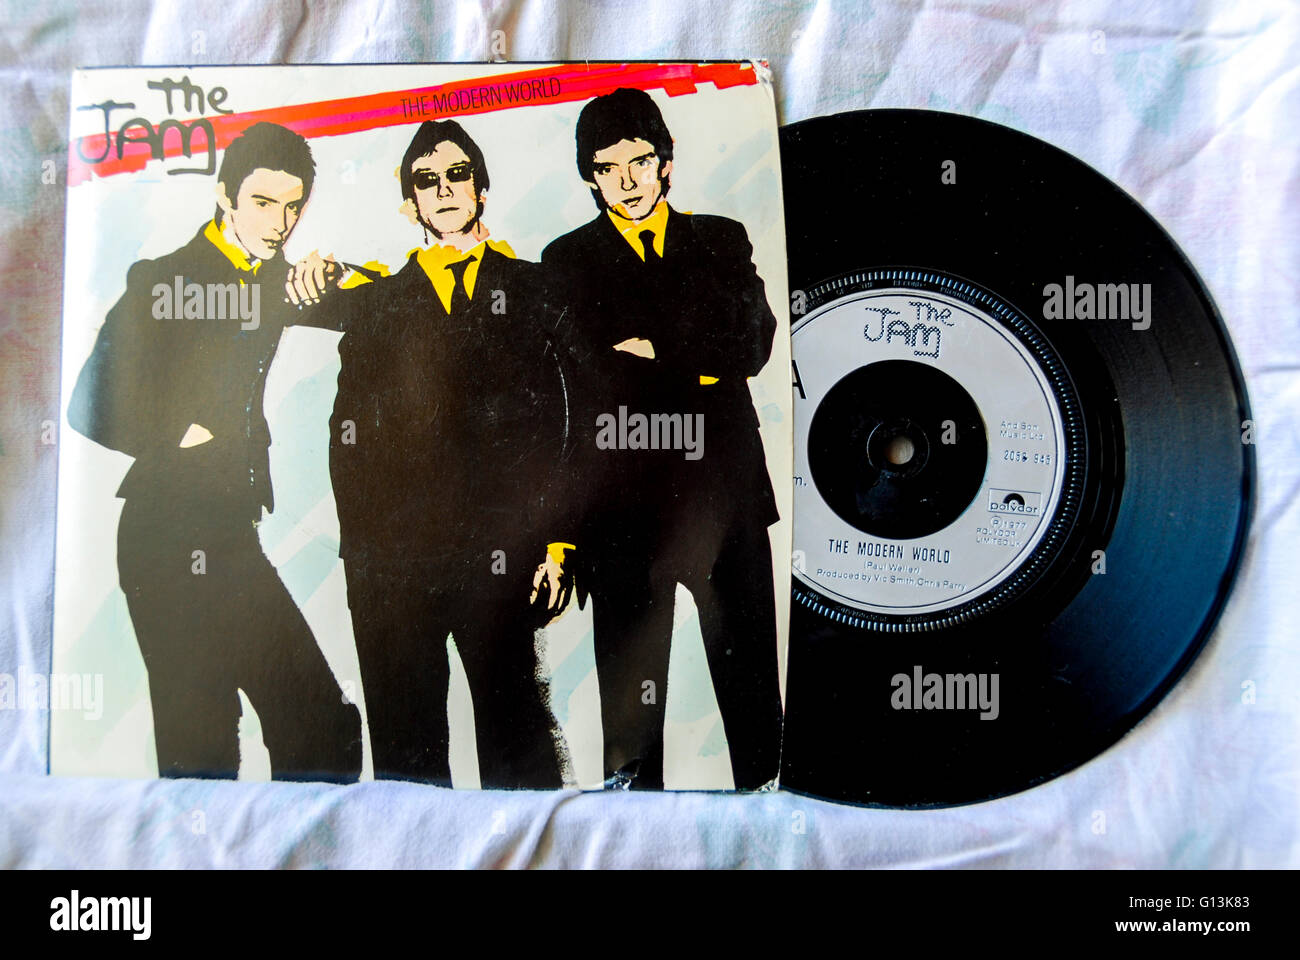 Old Record Albums on Shelves. 'The Jam' New Wave Rock Music, 45 Single Front Cover , 1970s rock'n'roll, vintage photos Stock Photo